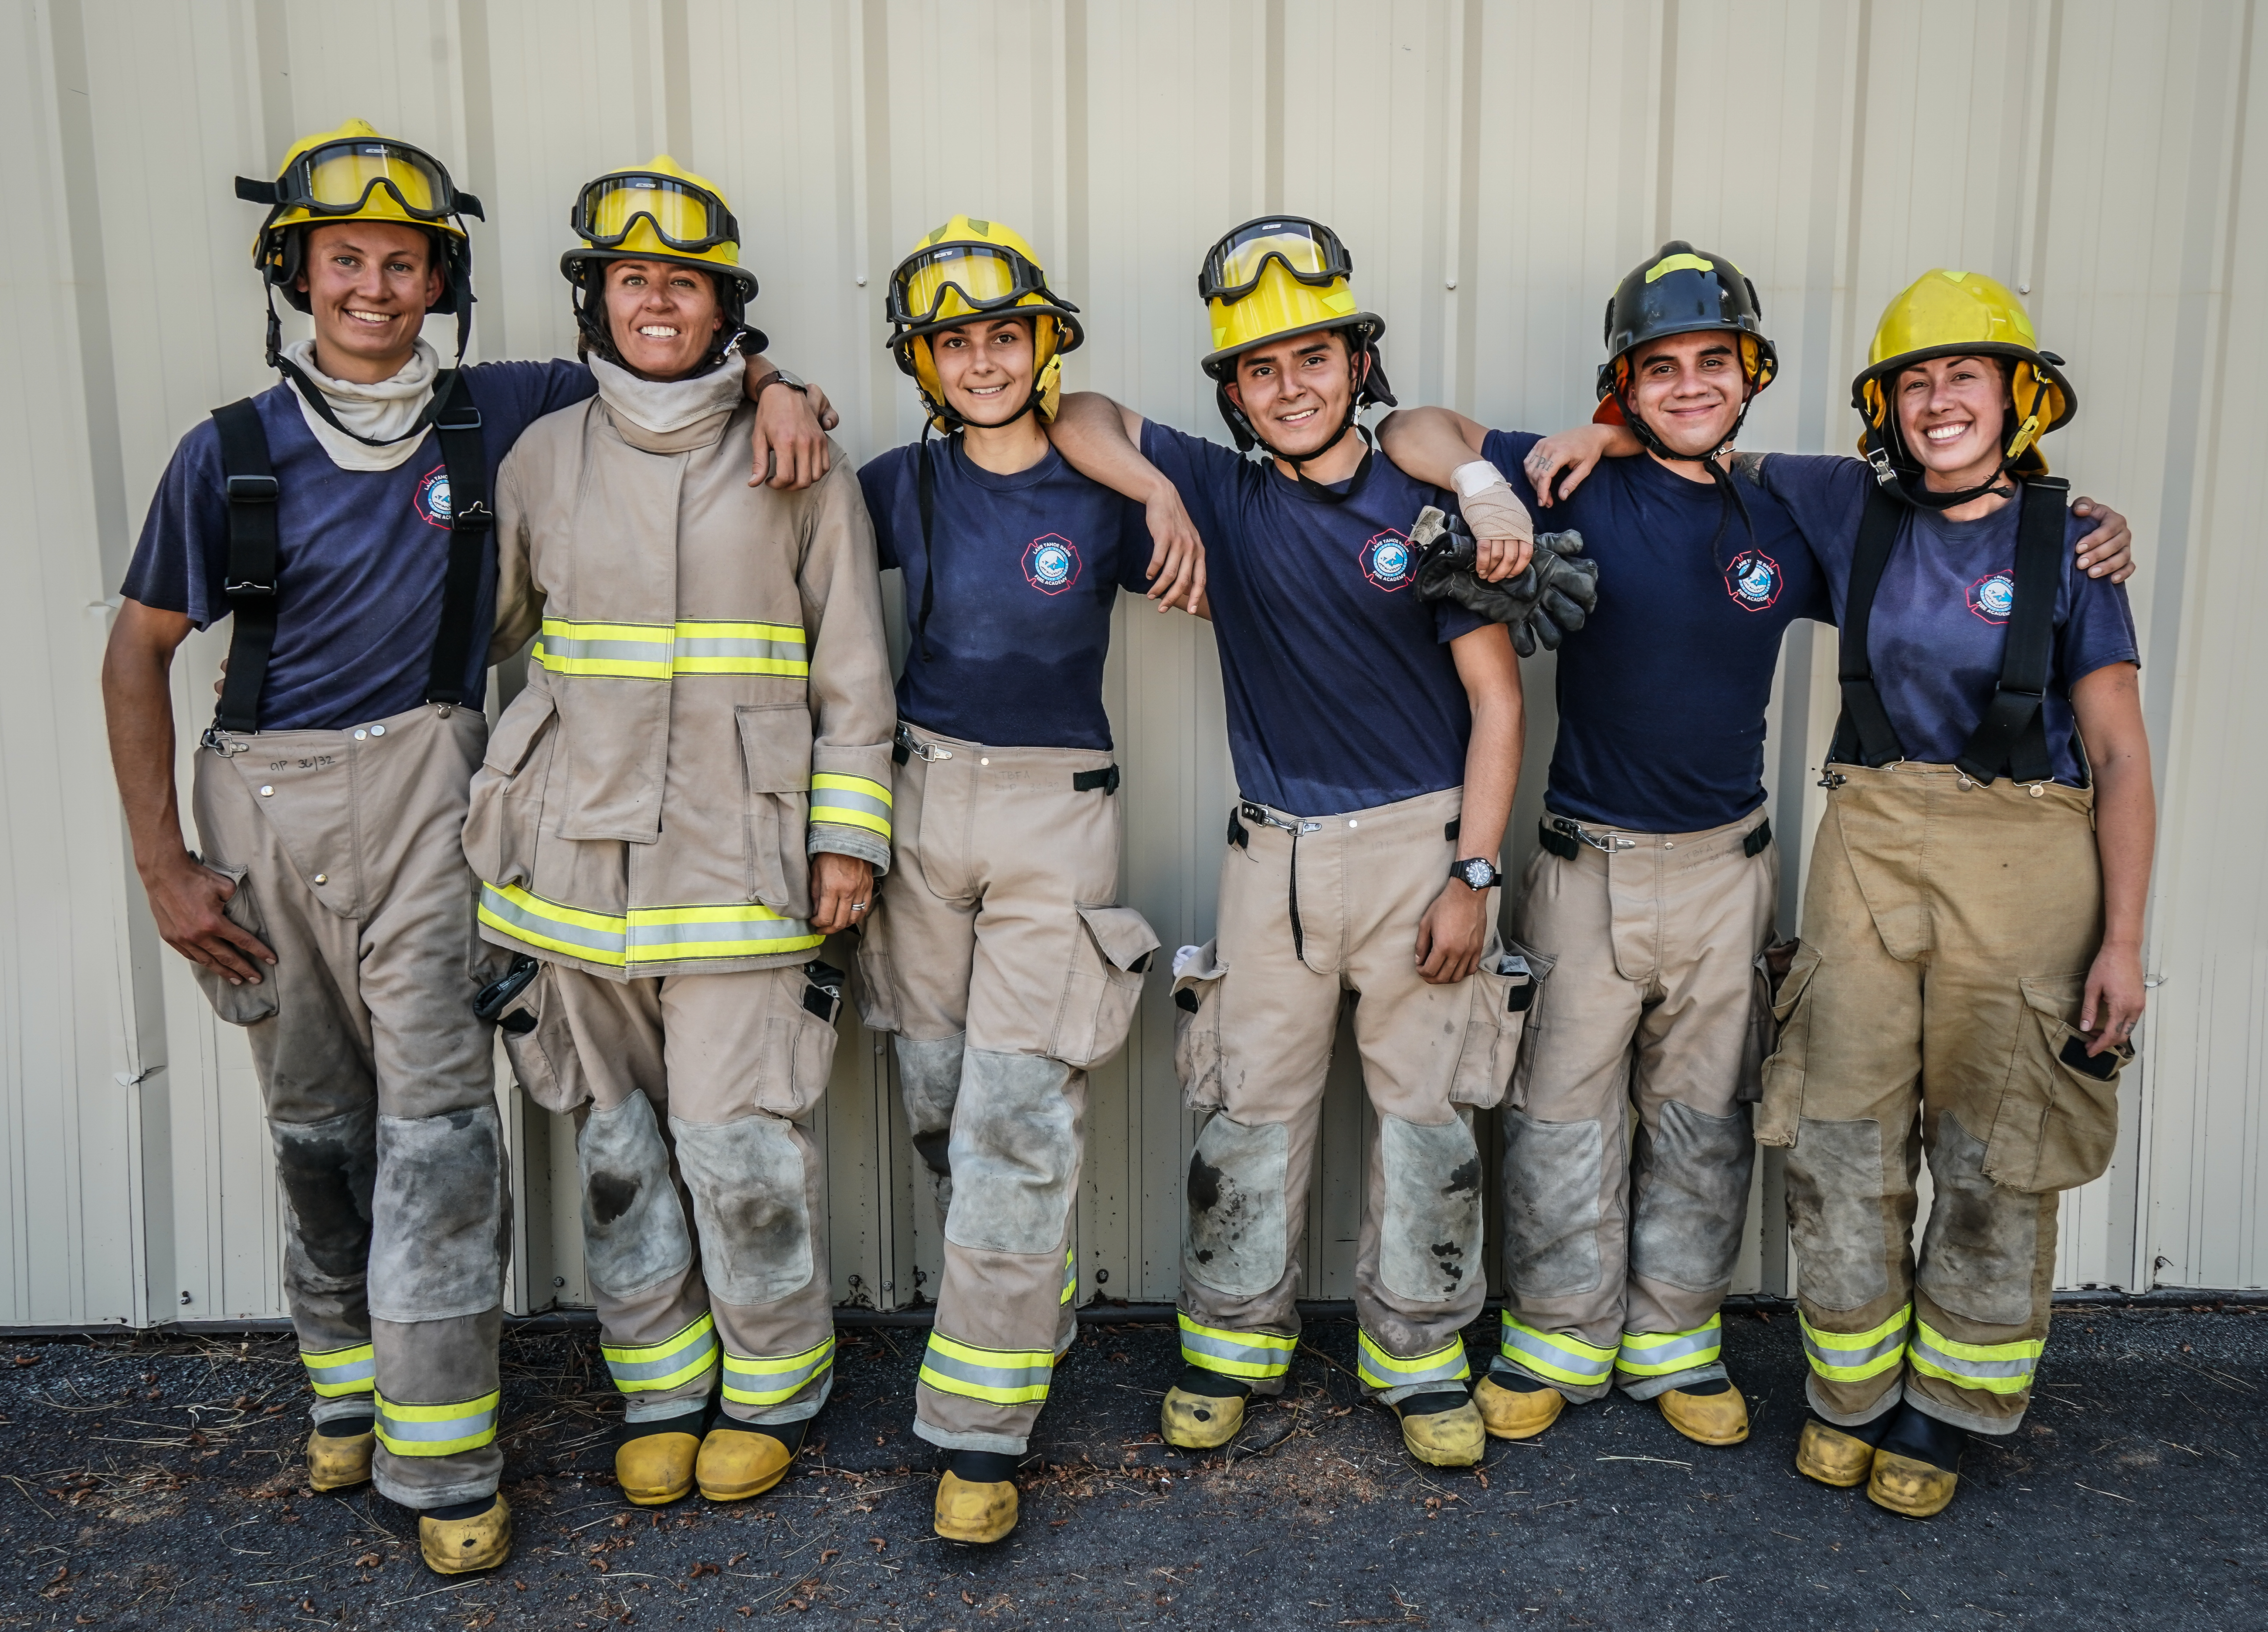 FIre Academy students